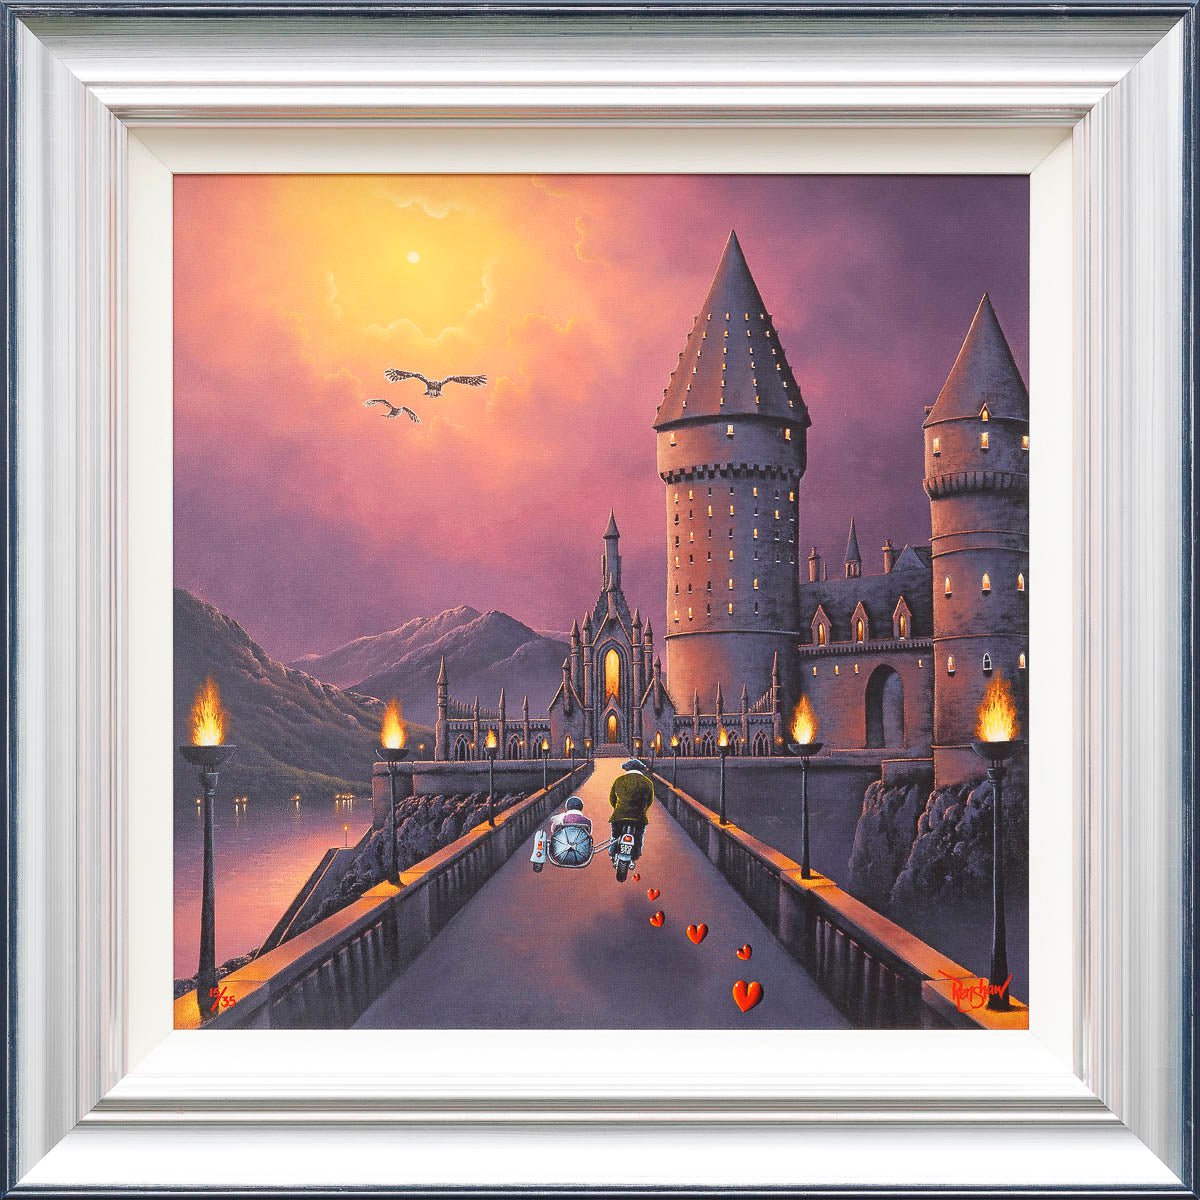 Our Kind of Magic - Edition - LAUNCH END OCT David Renshaw Edition 2